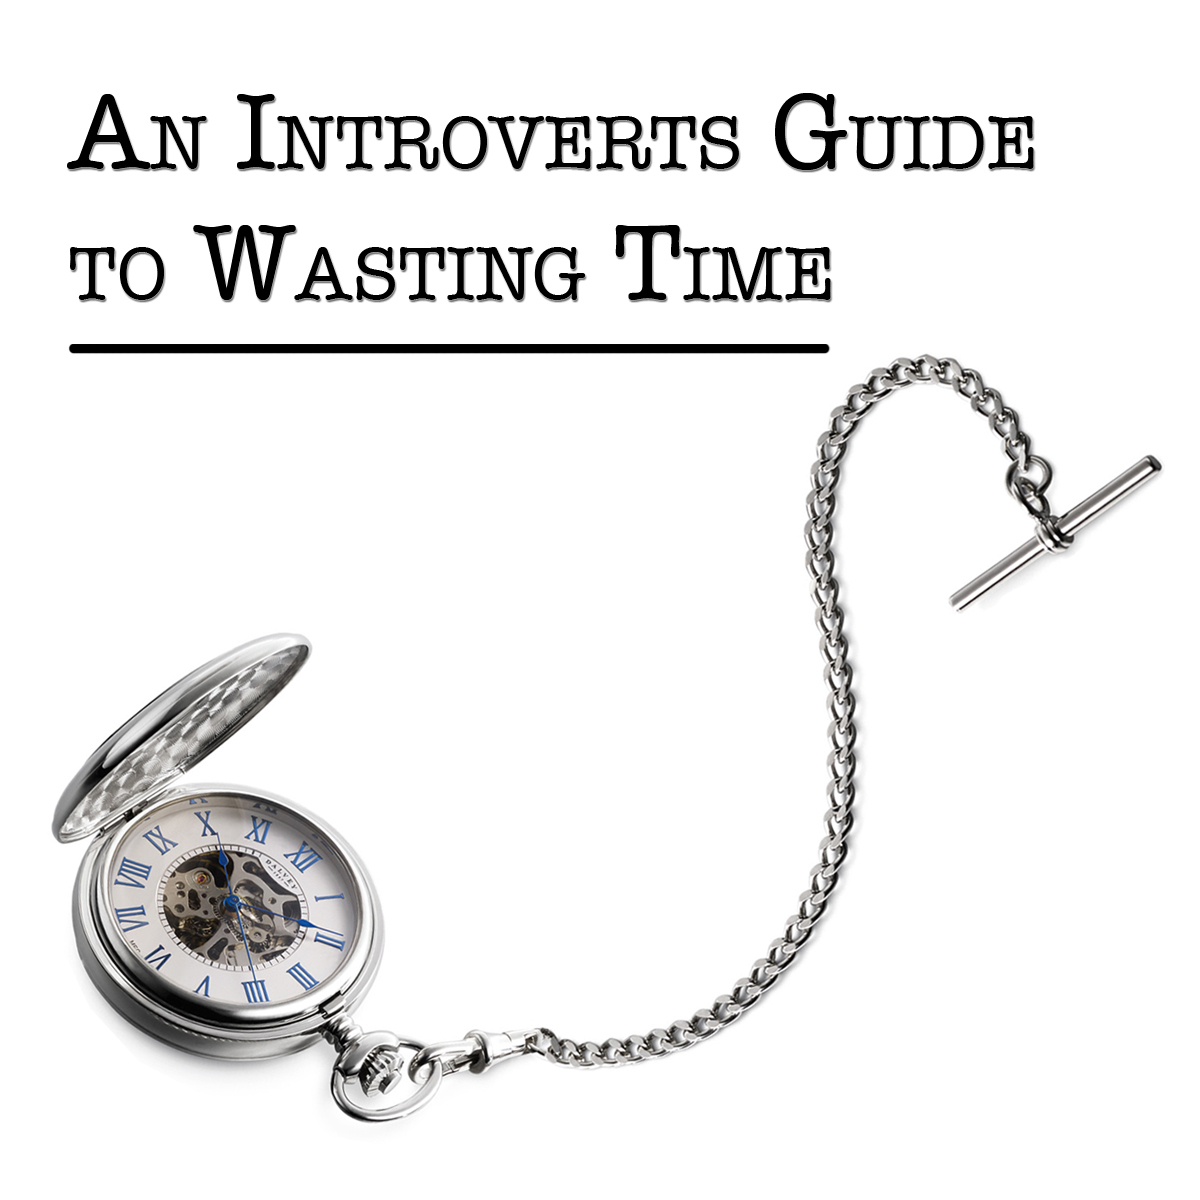 An Introvert’s Guide to Wasting Time: Episode 2